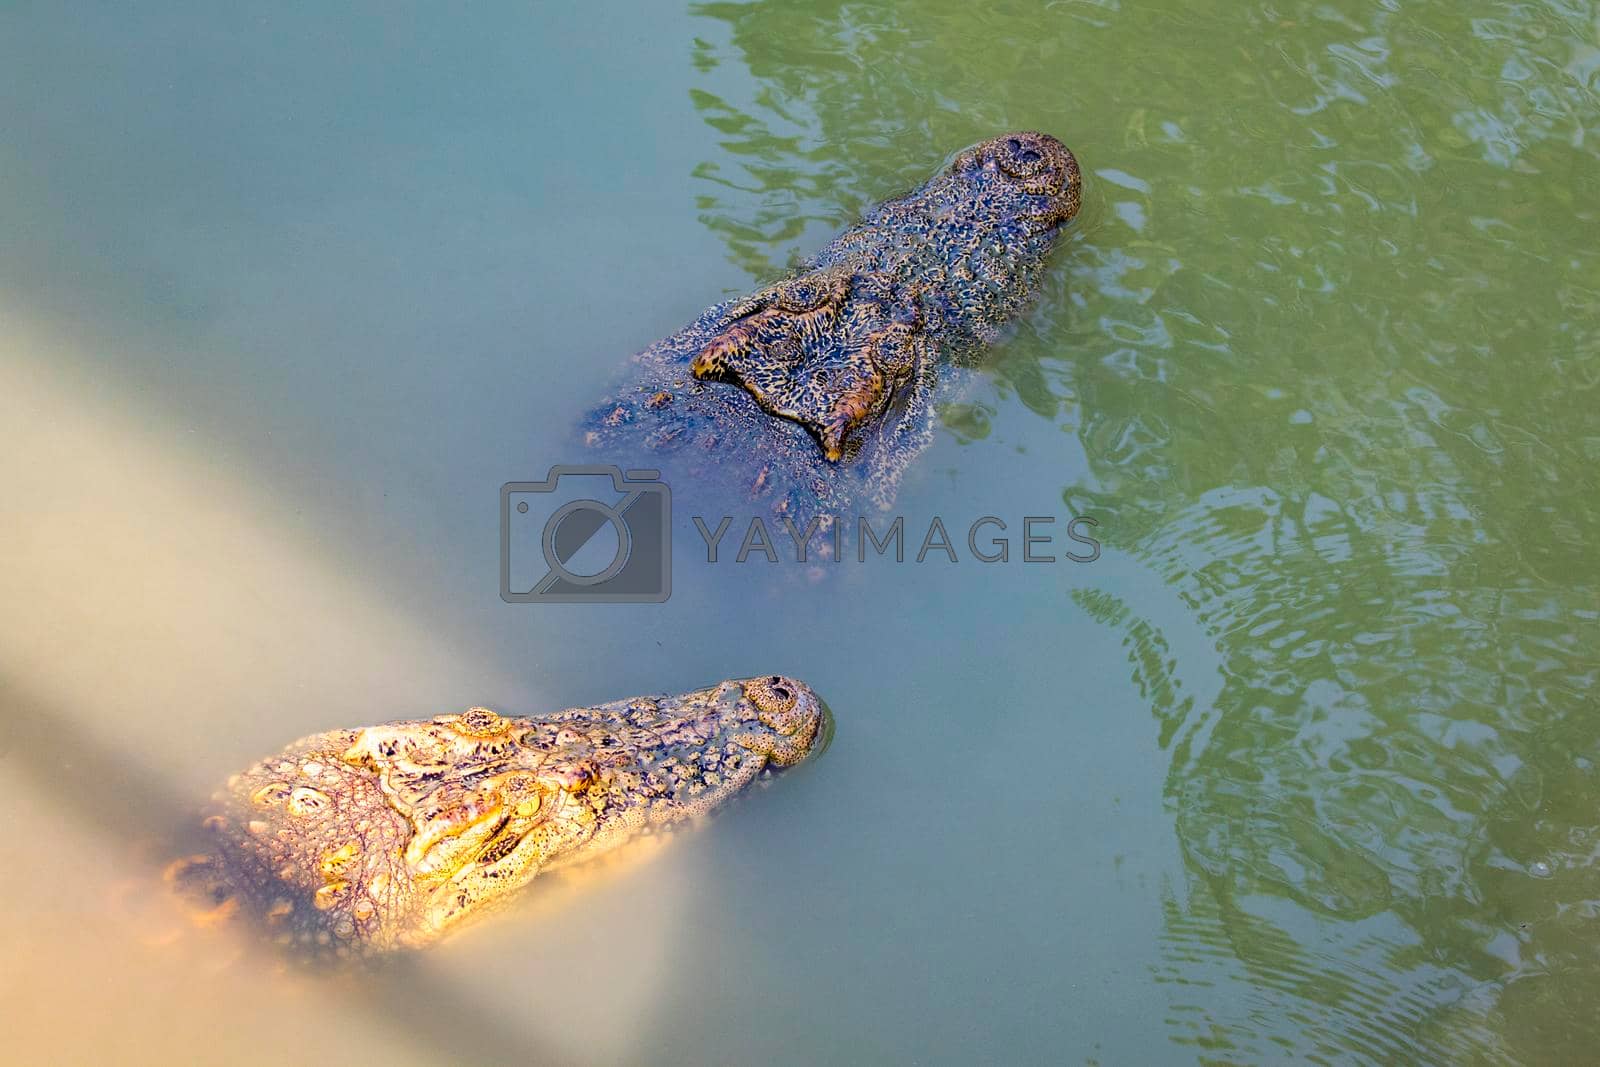 Royalty free image of Image of a crocodile head in the water. Reptile Animals. by yod67